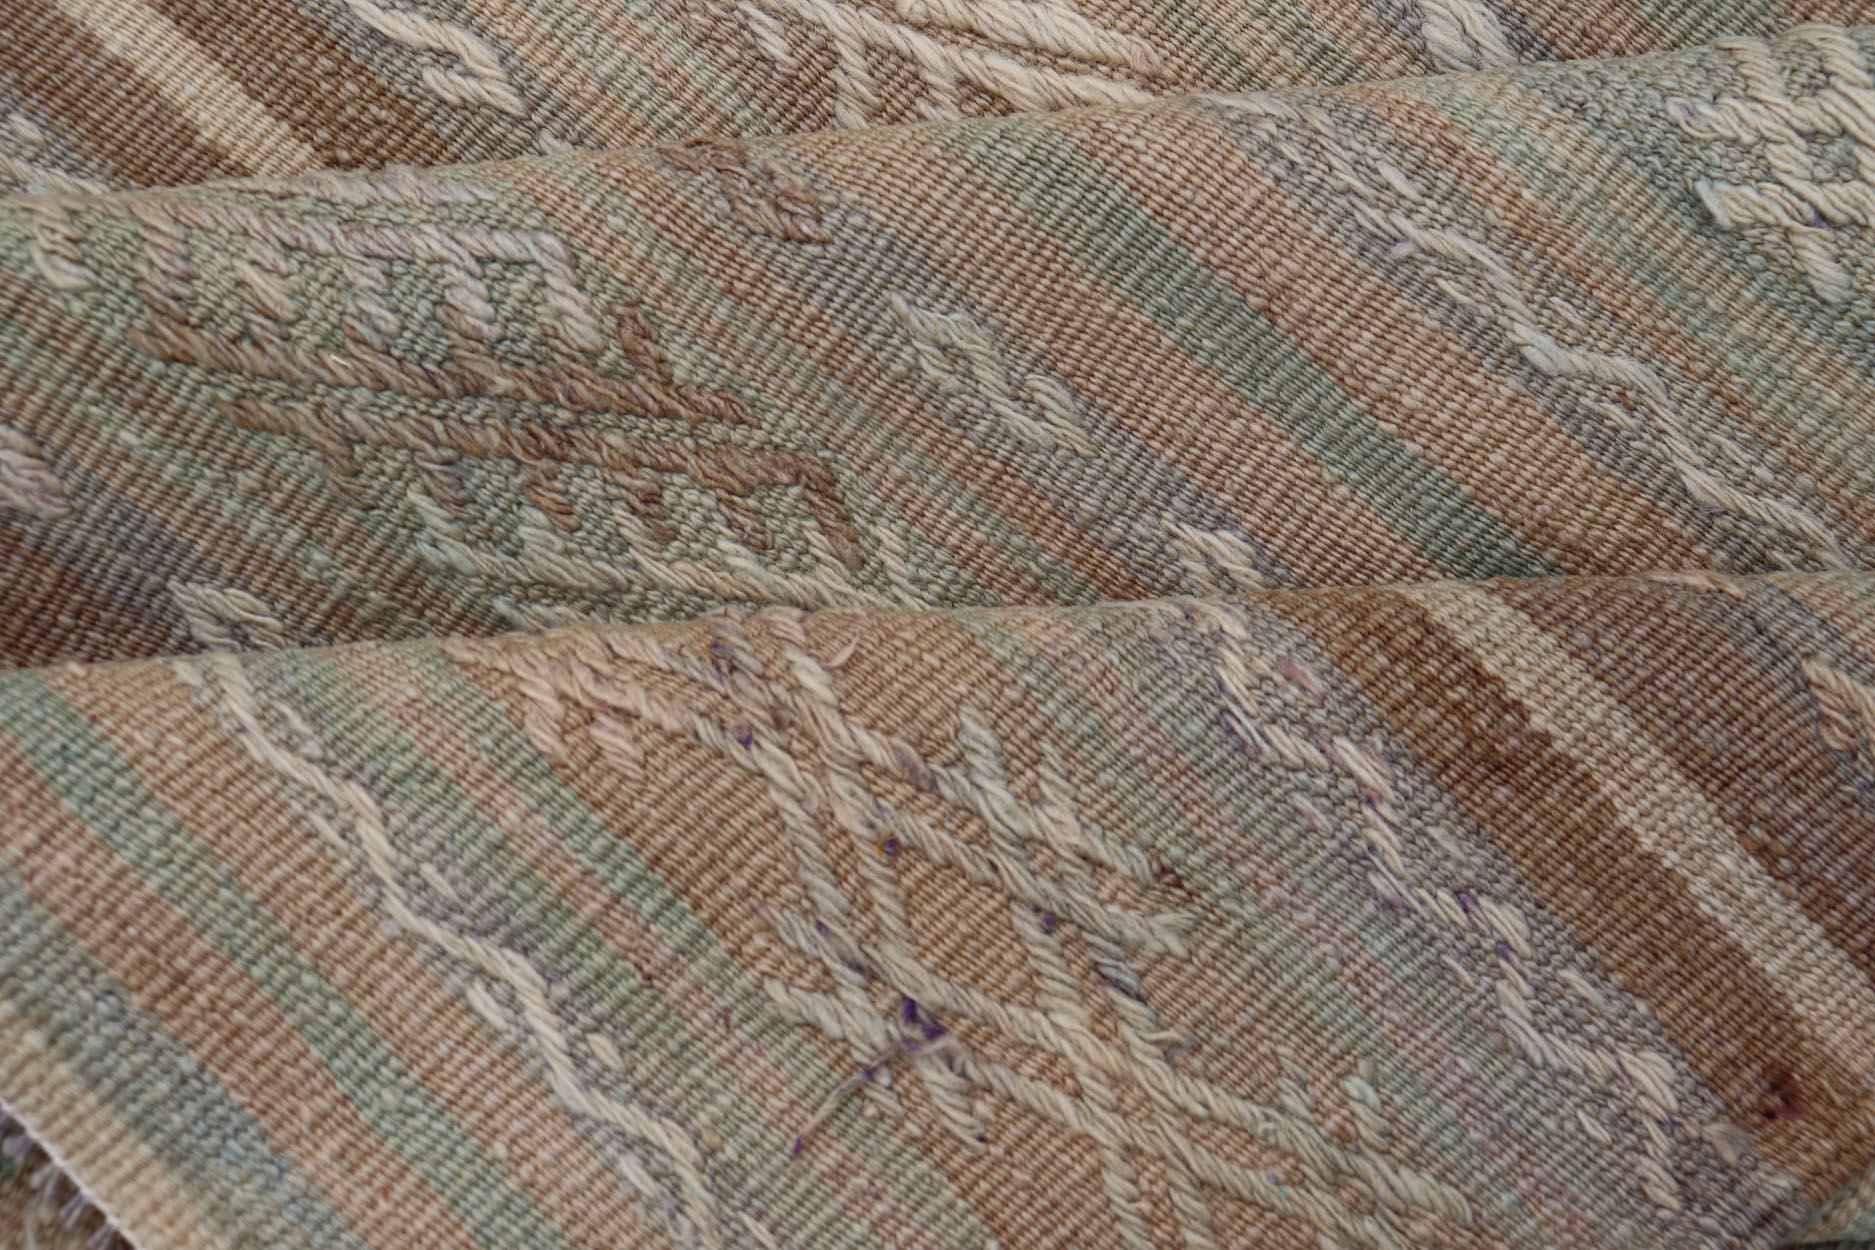 Vintage Turkish Flat-Weave Kilim with Embroideries in Muted Tones and Stripes 4